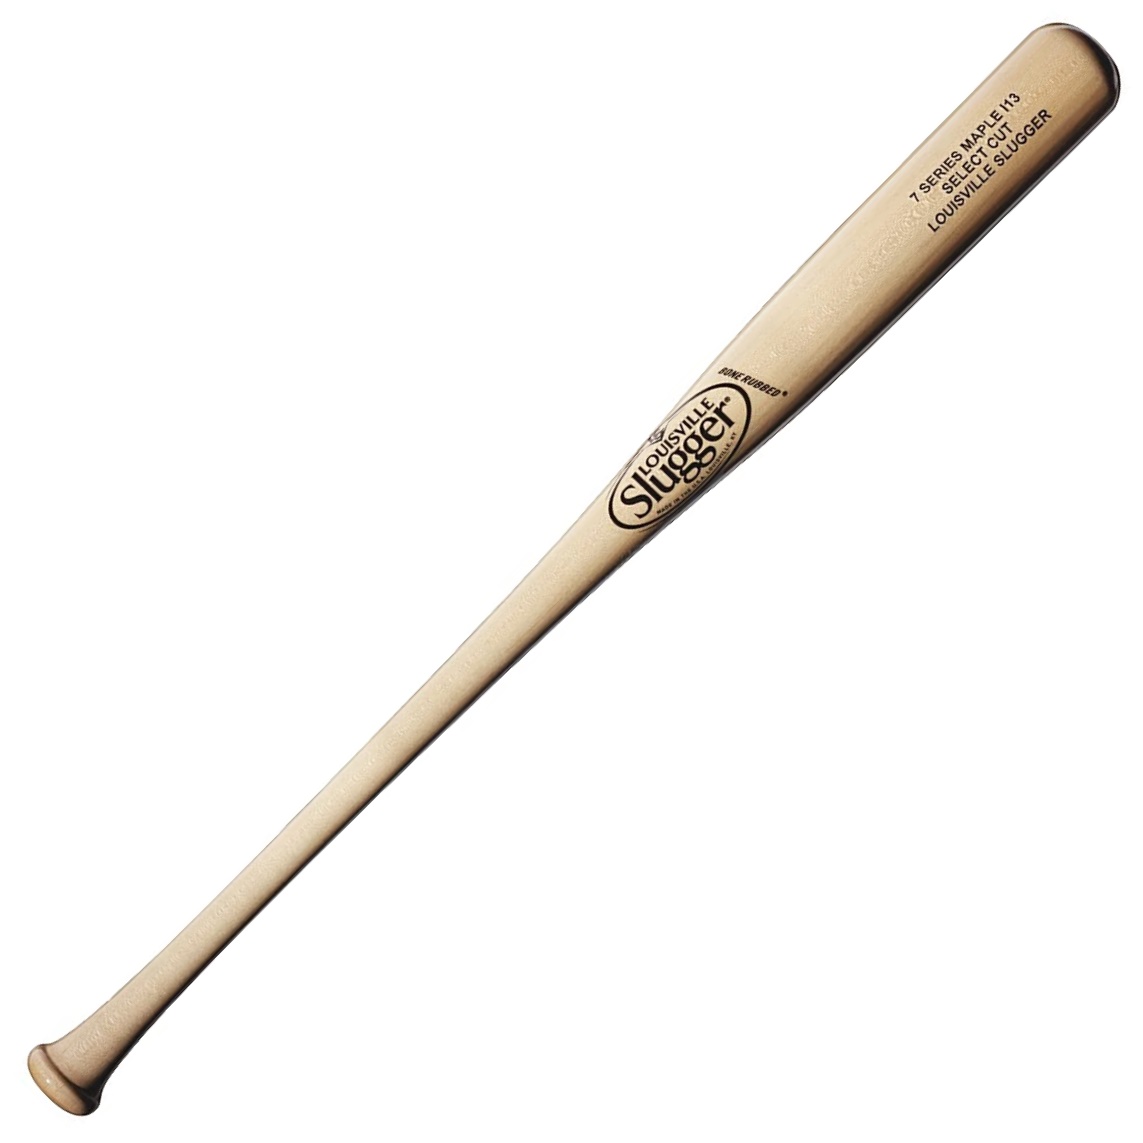 Louisville Slugger most popular big-barrel bat -- the I13 -- with an HD high gloss natural finish. This WTLW7MI13A1734 has a thick transition from barrel to handle, maximizing mass through the hitting zone. Series 7 maple Bone Rubbed Swing weight: slight end load Medium barrel, thick handle